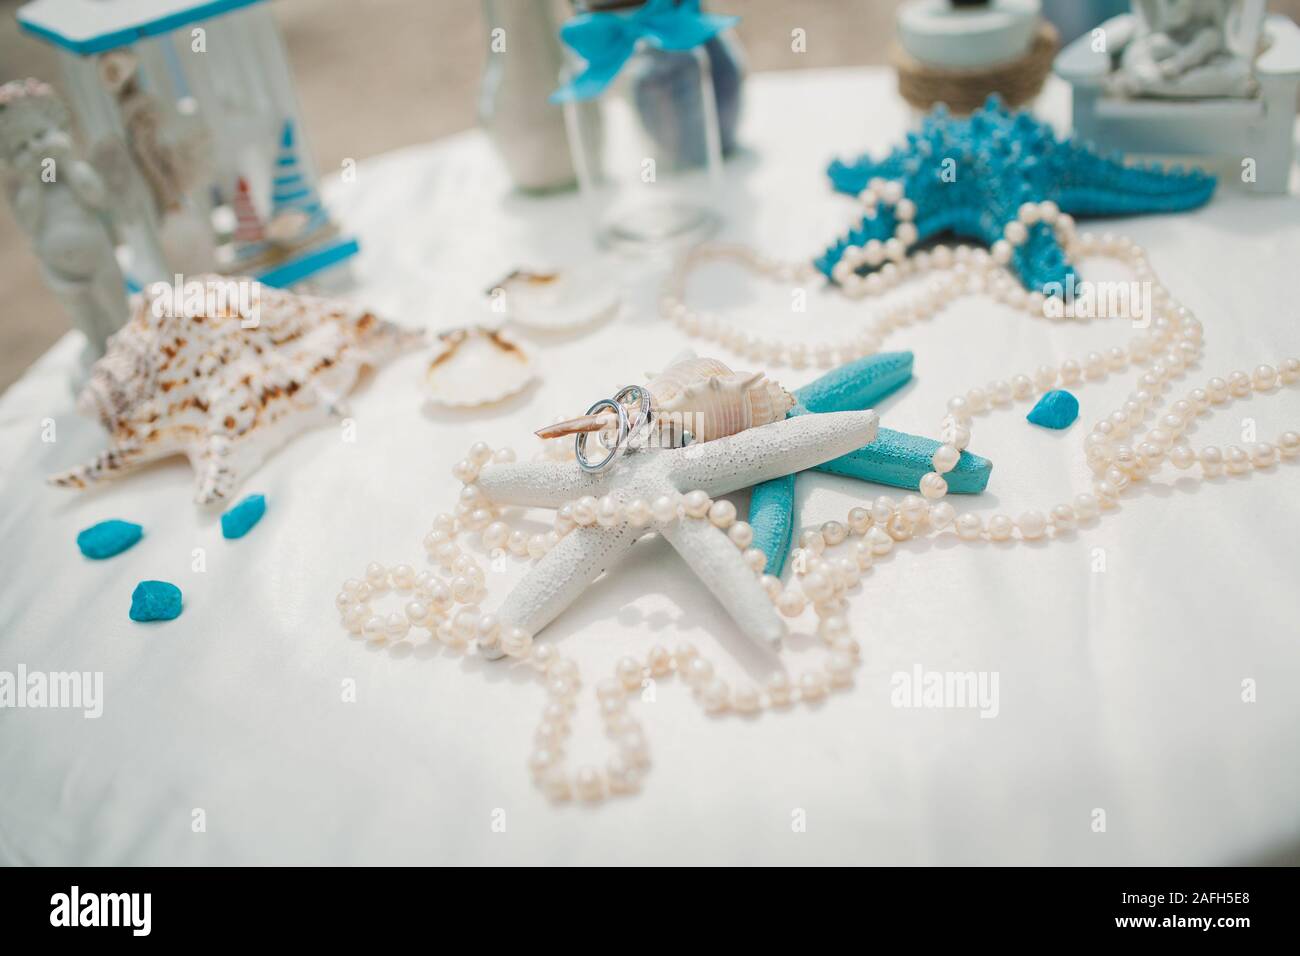 White and blue wedding decorations on a white table on a beach